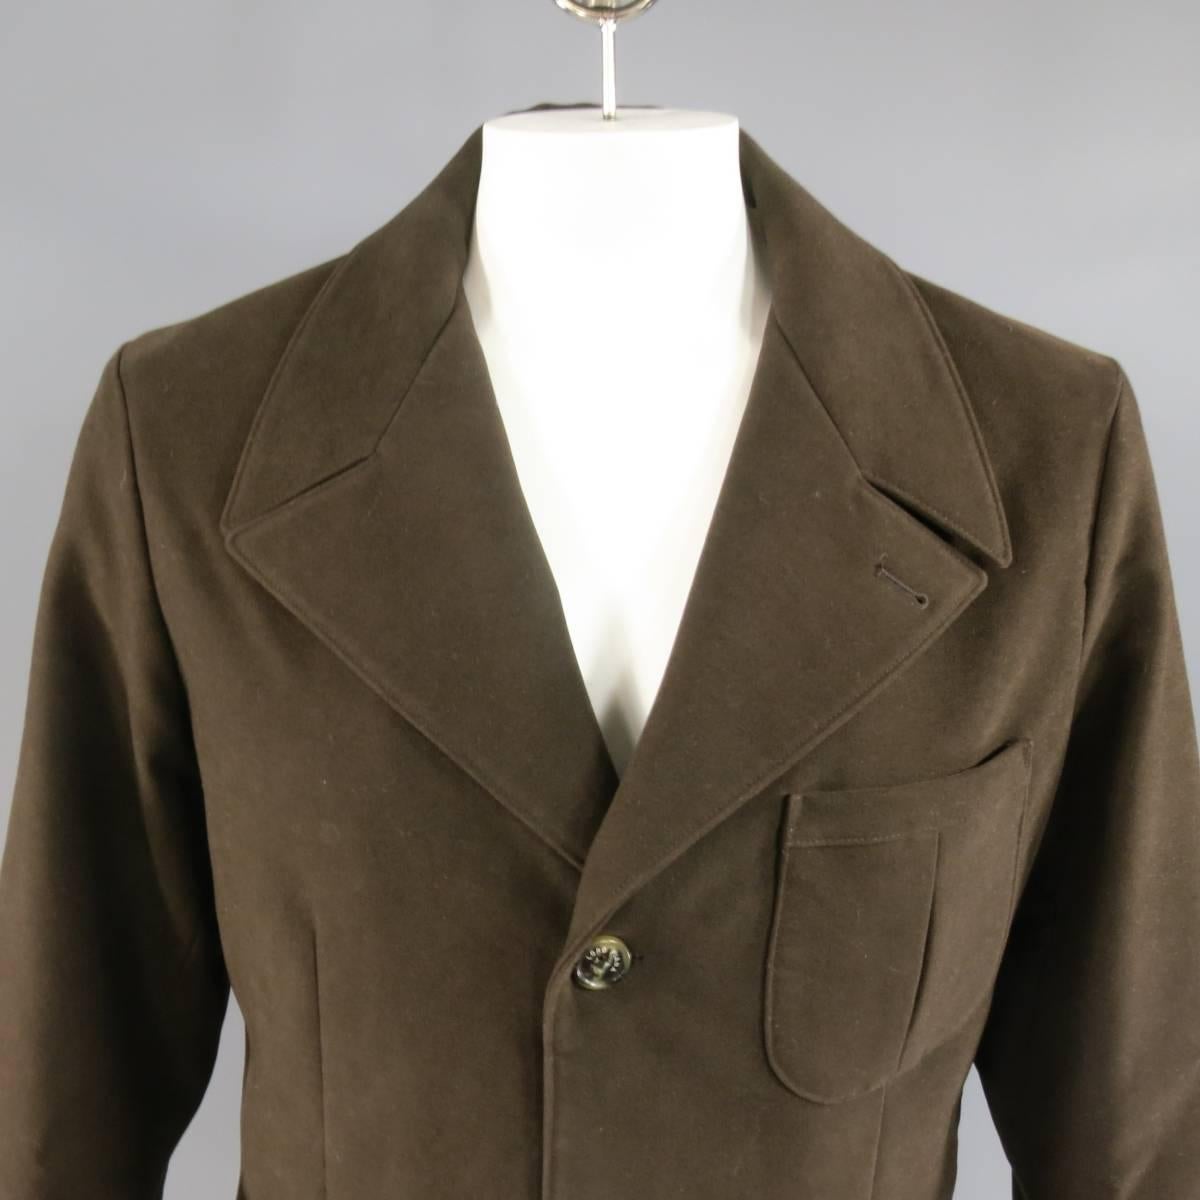 Classic military style coat by LORO PIANA in a rich brown cotton velvety fabric featuring a pointed lapel, button up closure, plaid Storm System lining, and patch pockets. Made in Italy
Retails at $2450.00.

Excellent Pre-Owned Condition.
